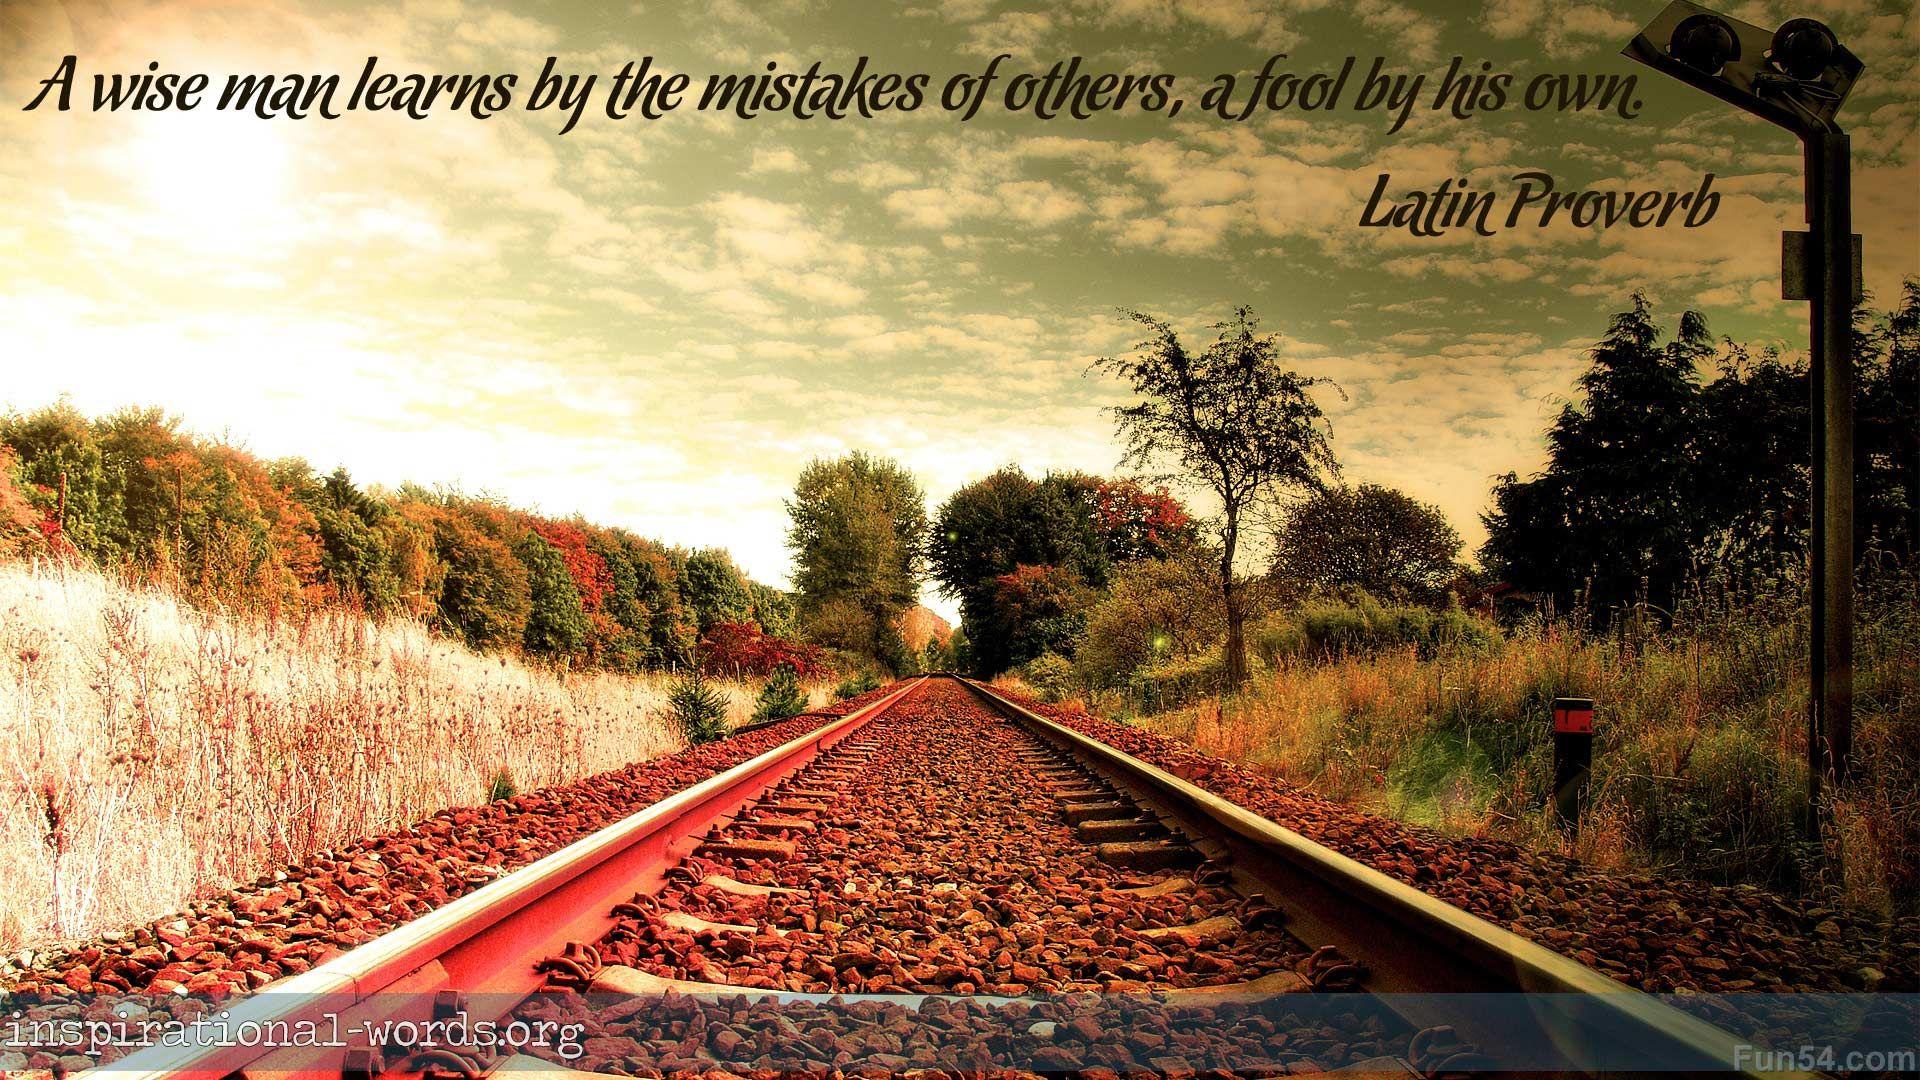 Inspirational Wallpaper Quote Latin Proverb. Inspirational words